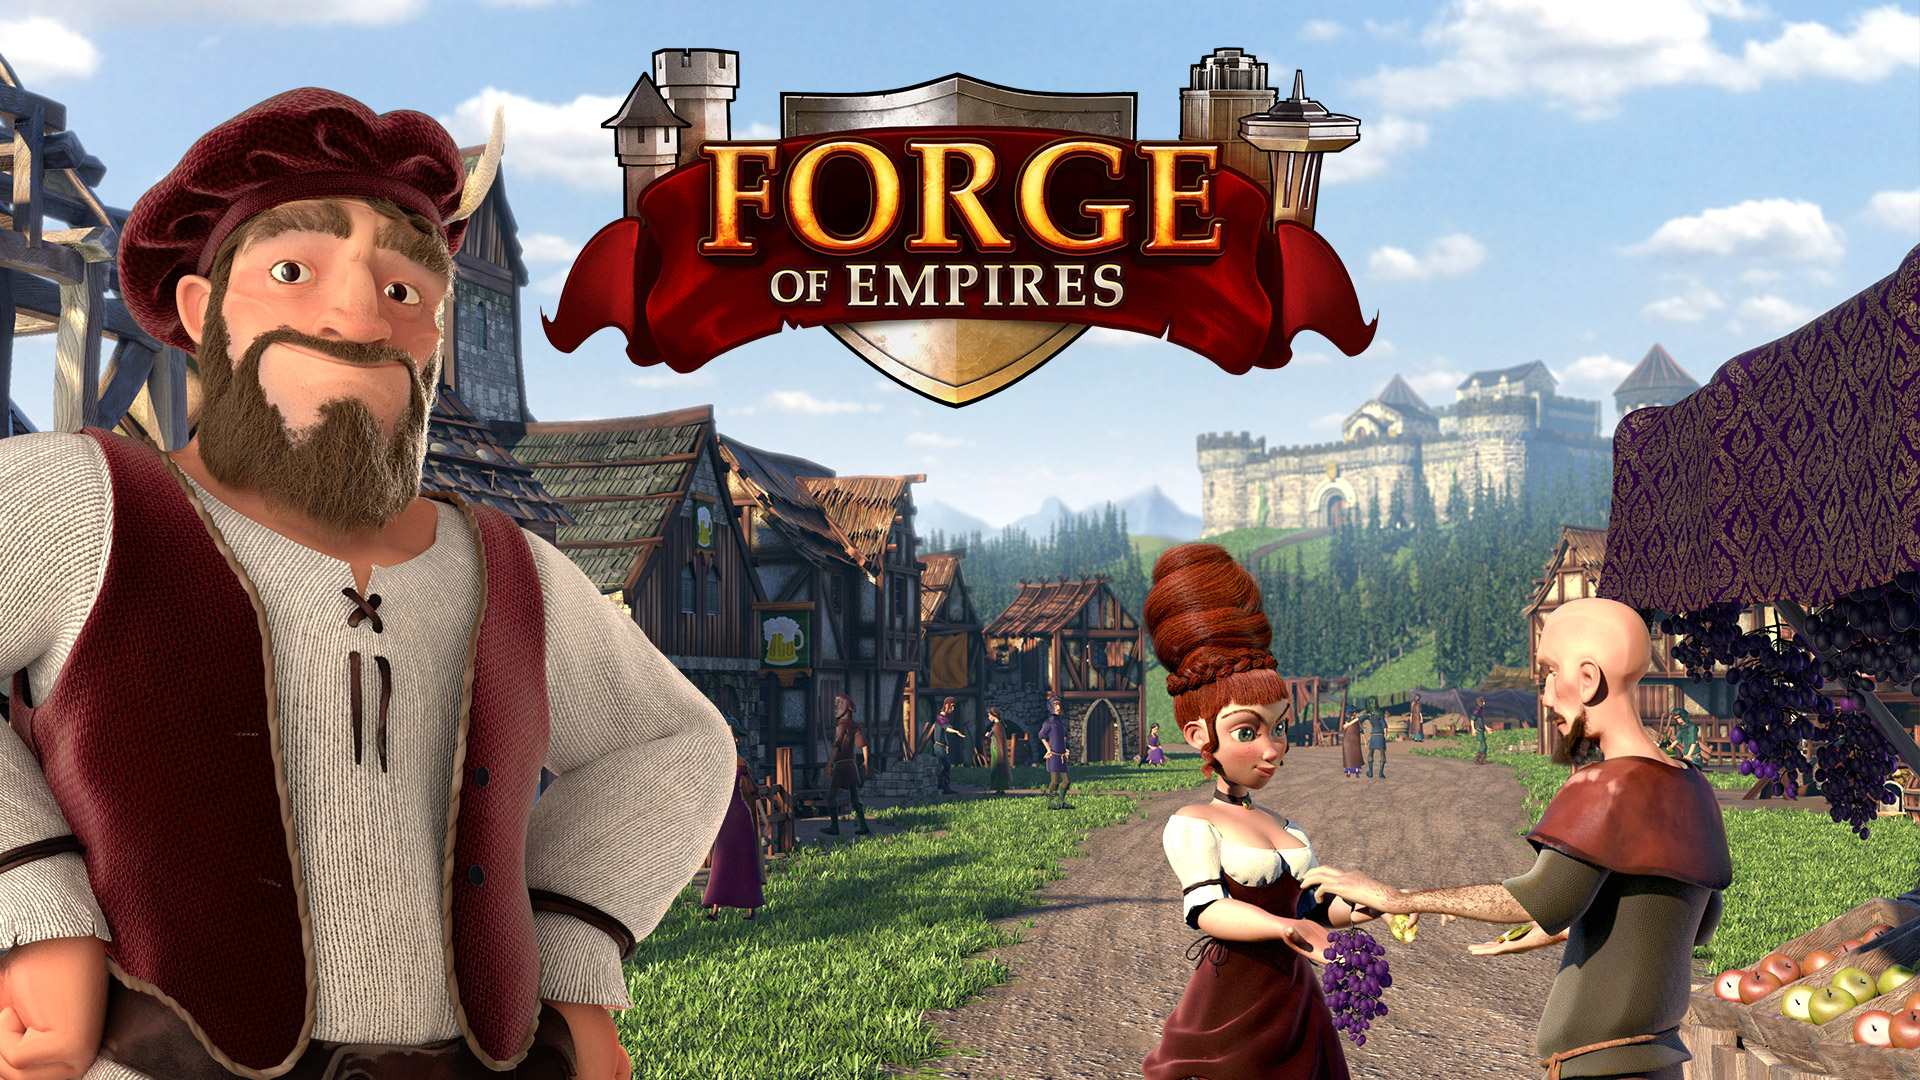 Video Games Forge Of Empires Village Men Women House Dirt Road Castle Middle Ages Grapes Video Game  1920x1080